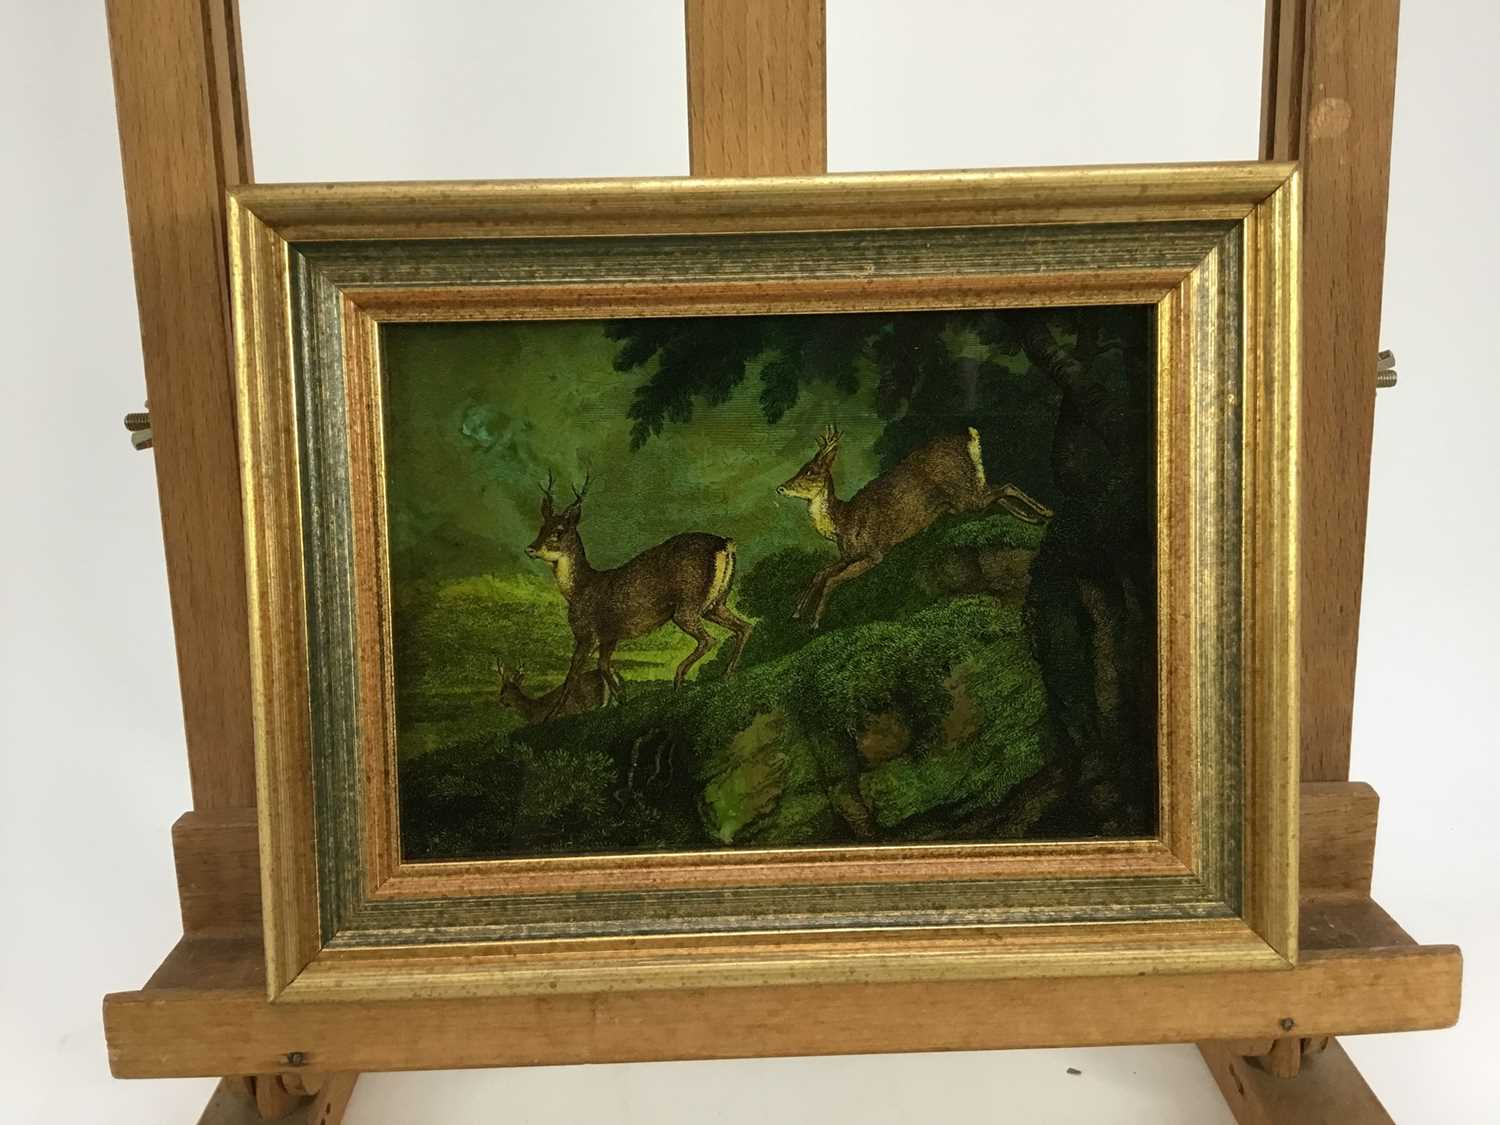 Jenny Simpson (1931-2020), Georgian-style glass pictures, framed and glazed - deer and a fox (3)